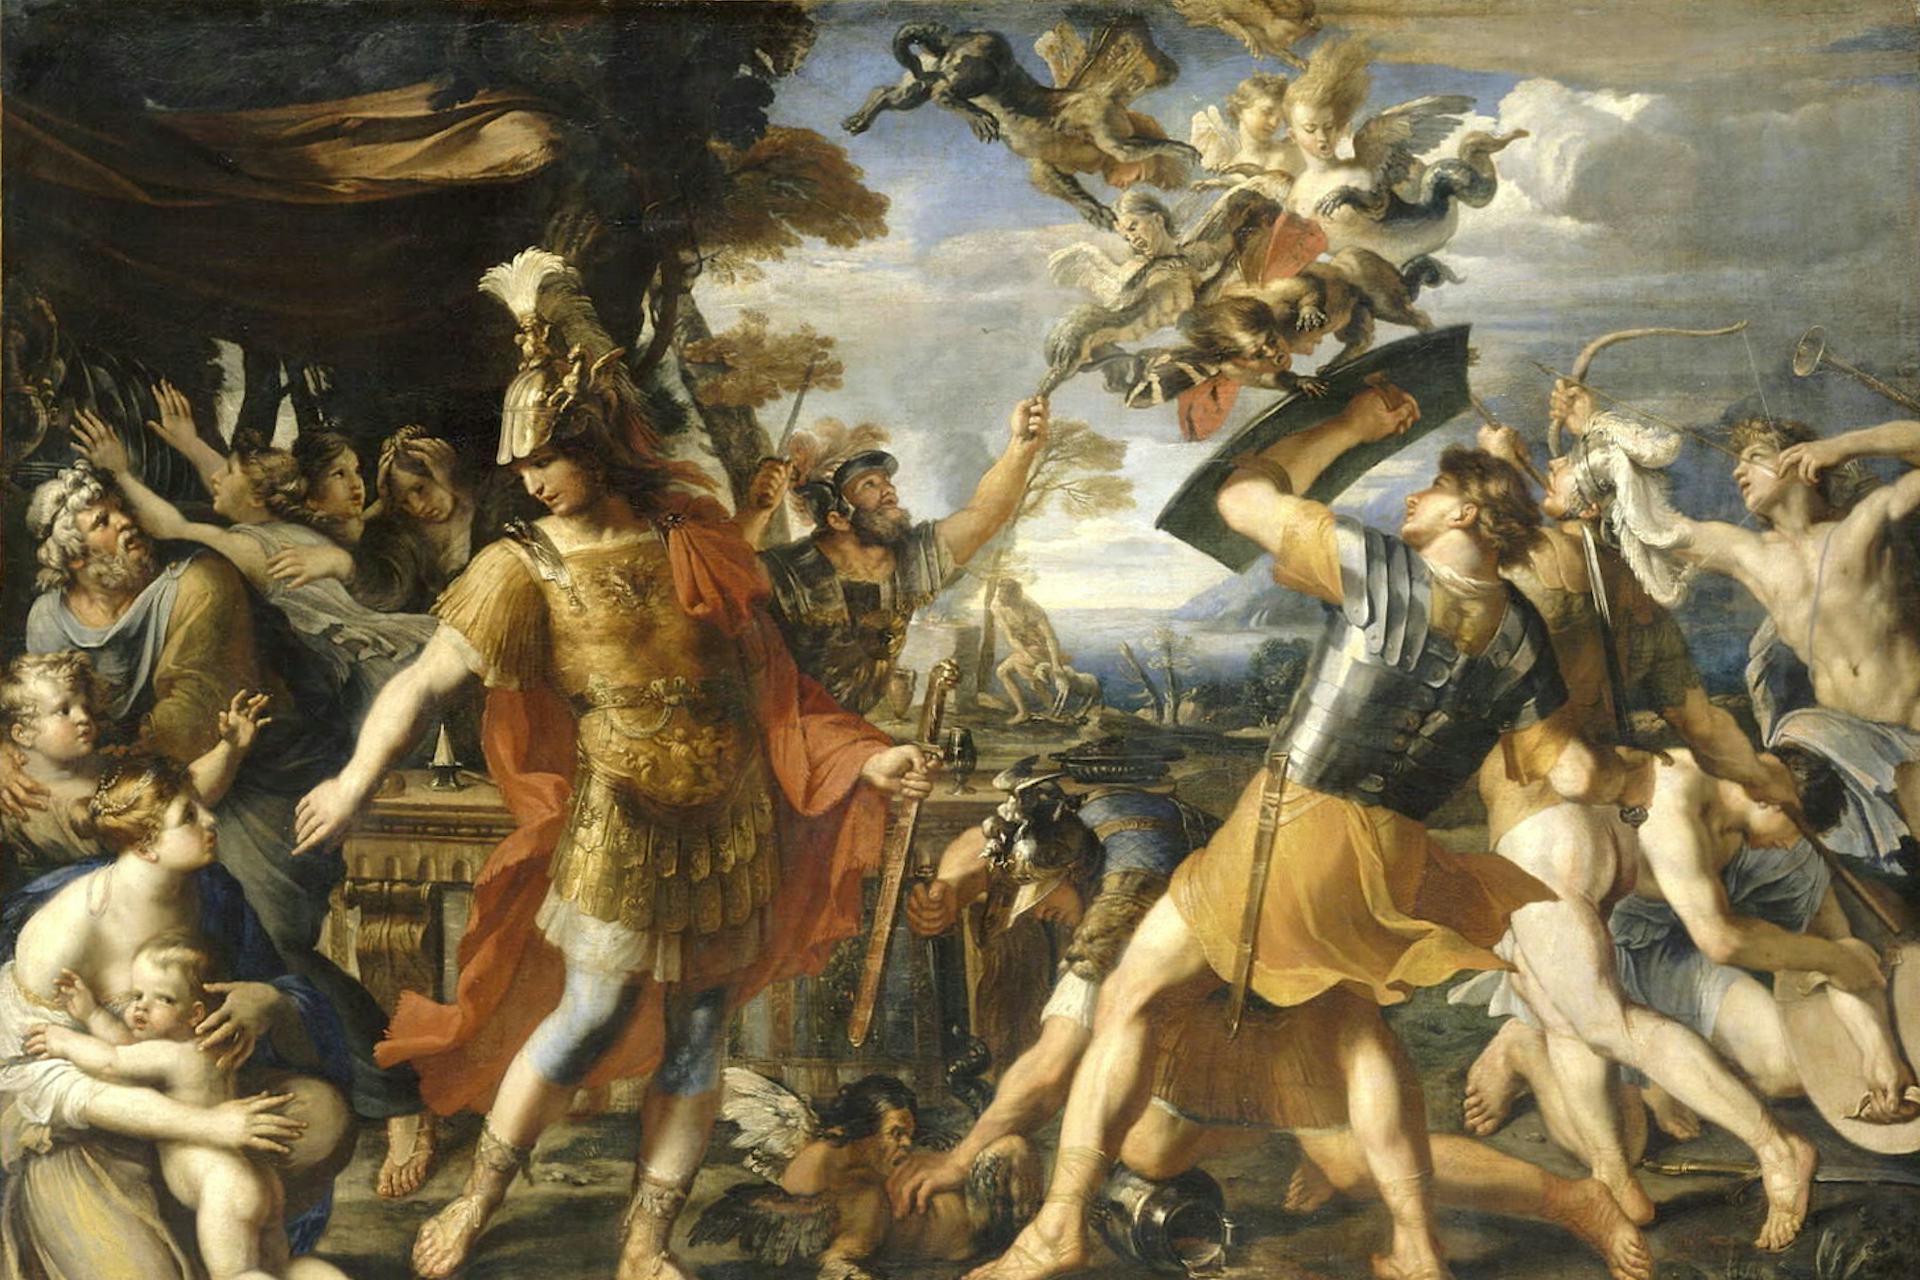 Aeneas and his companions fighting the Harpies by François Perrier (ca. 1645–46)